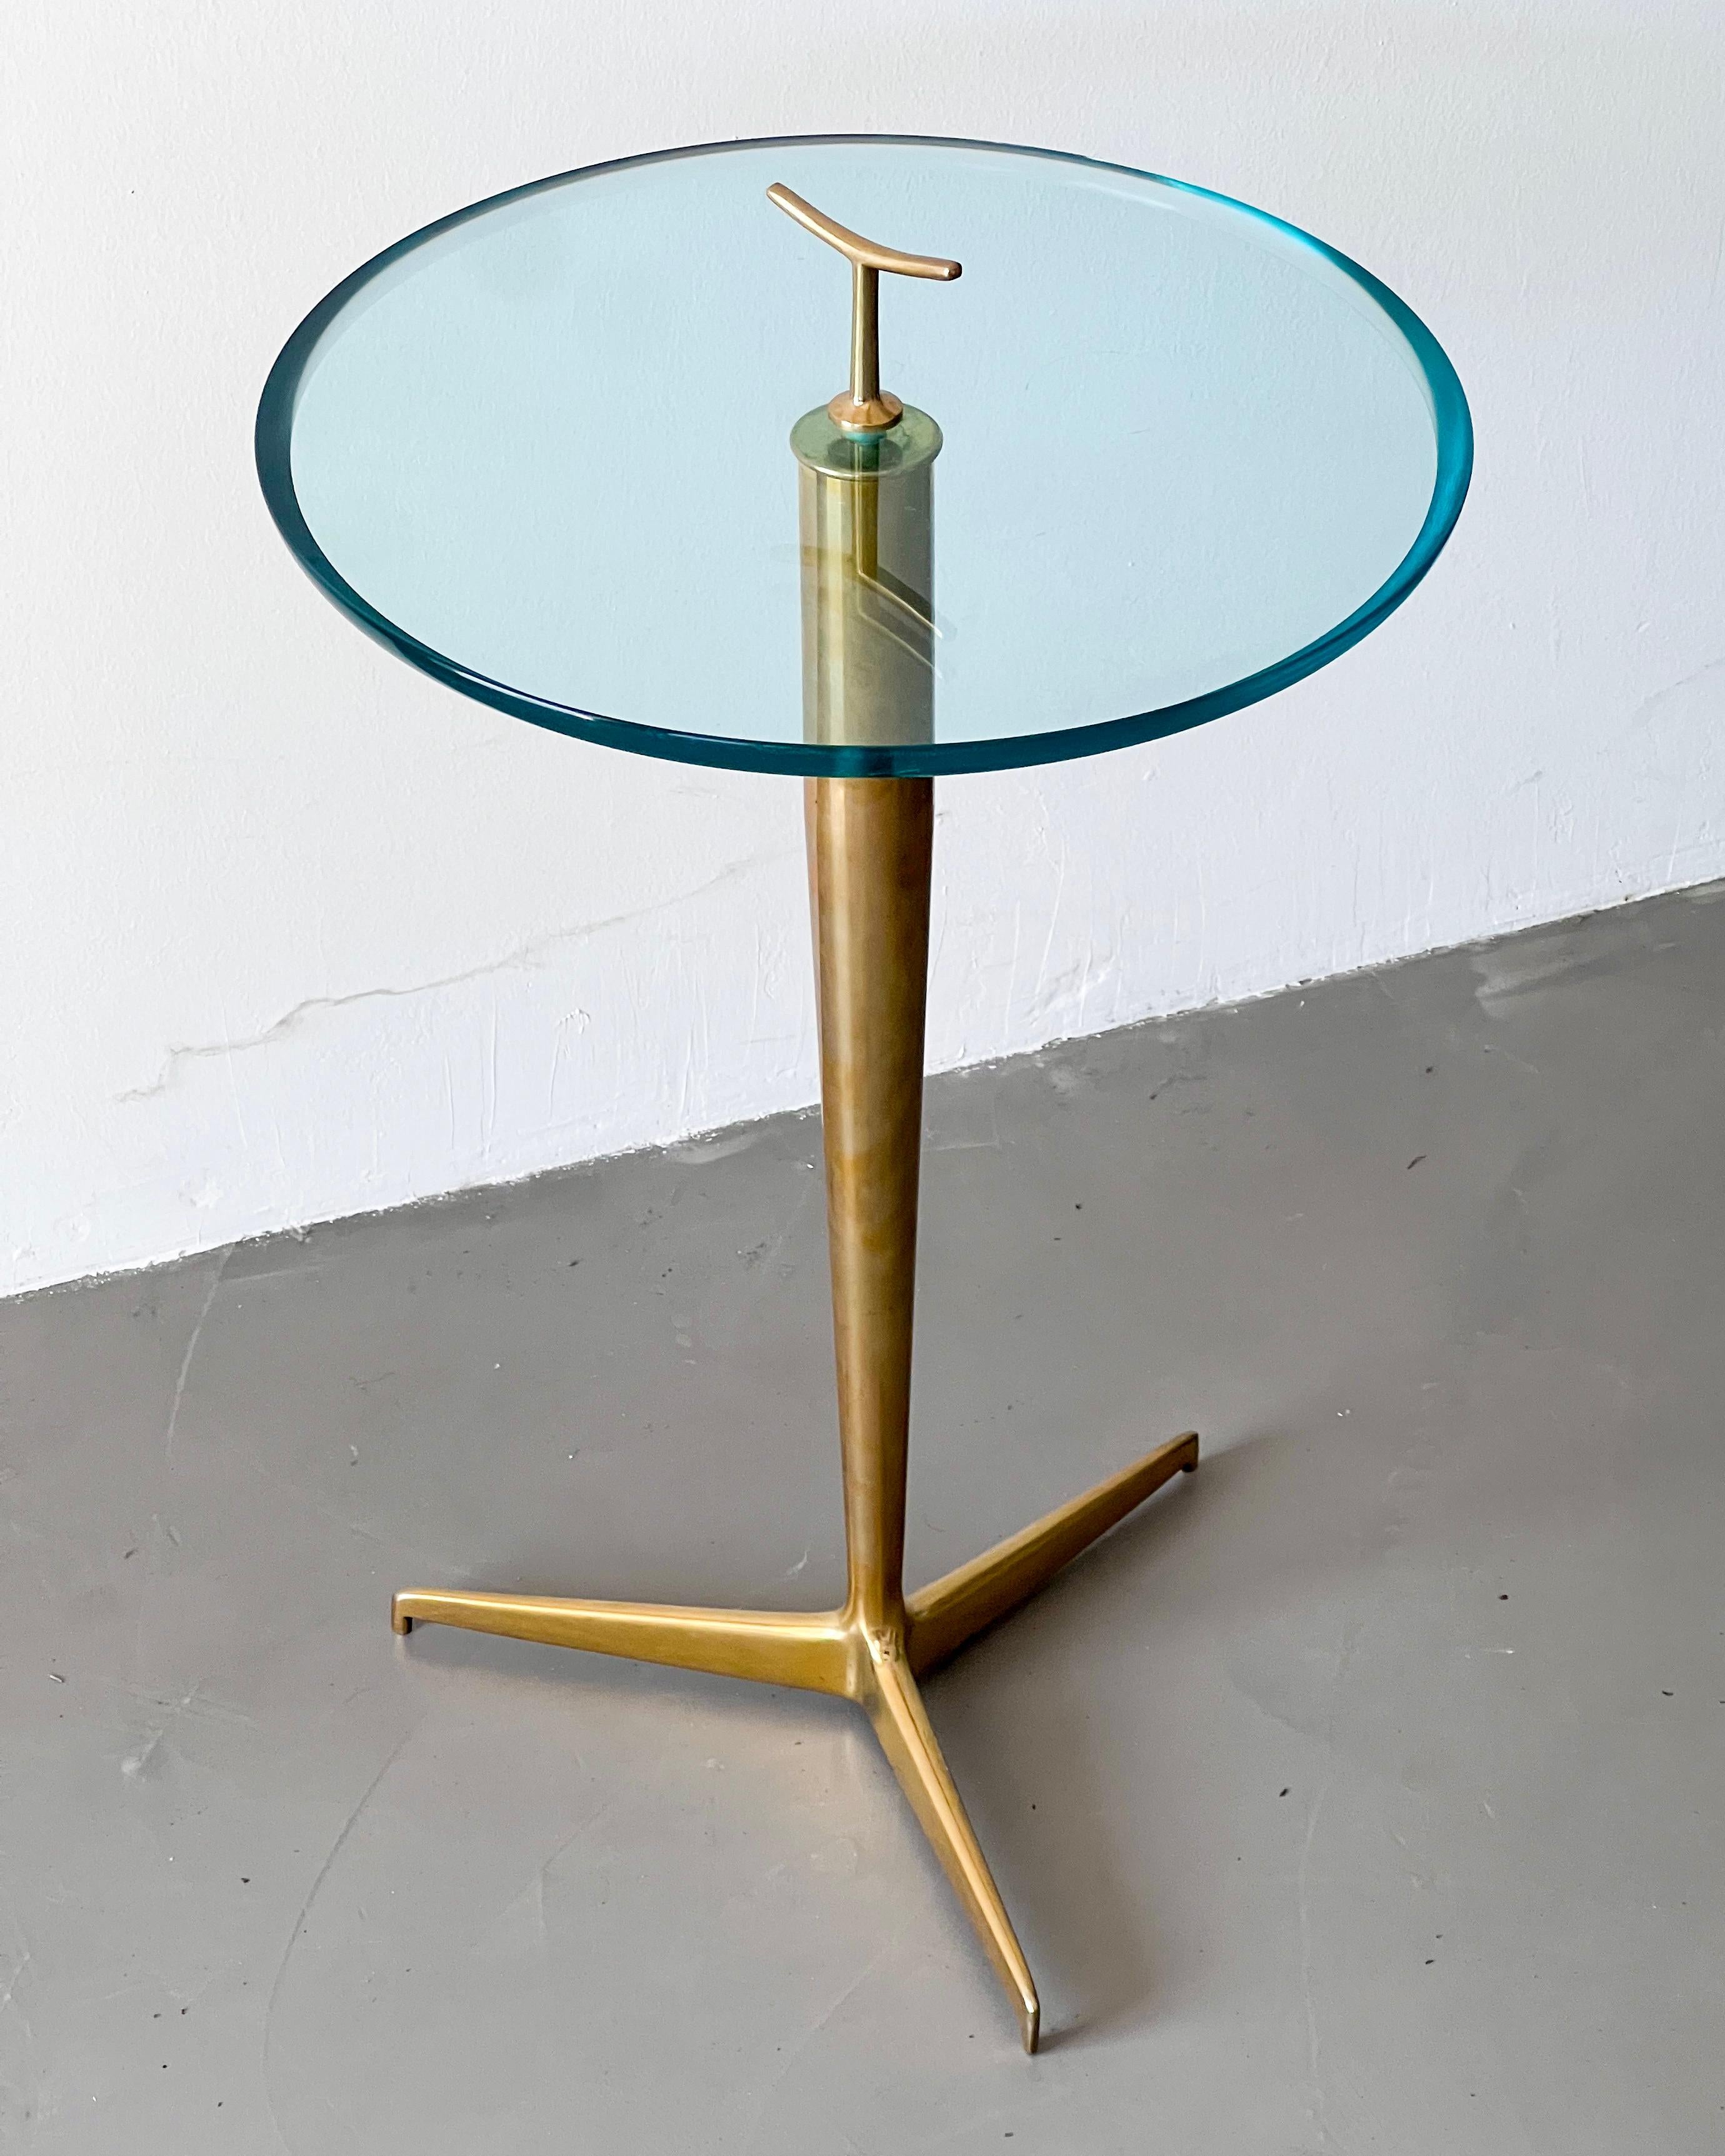 Vintage Italian midcentury end table in brass and glass by Giuseppe Ostuni 1